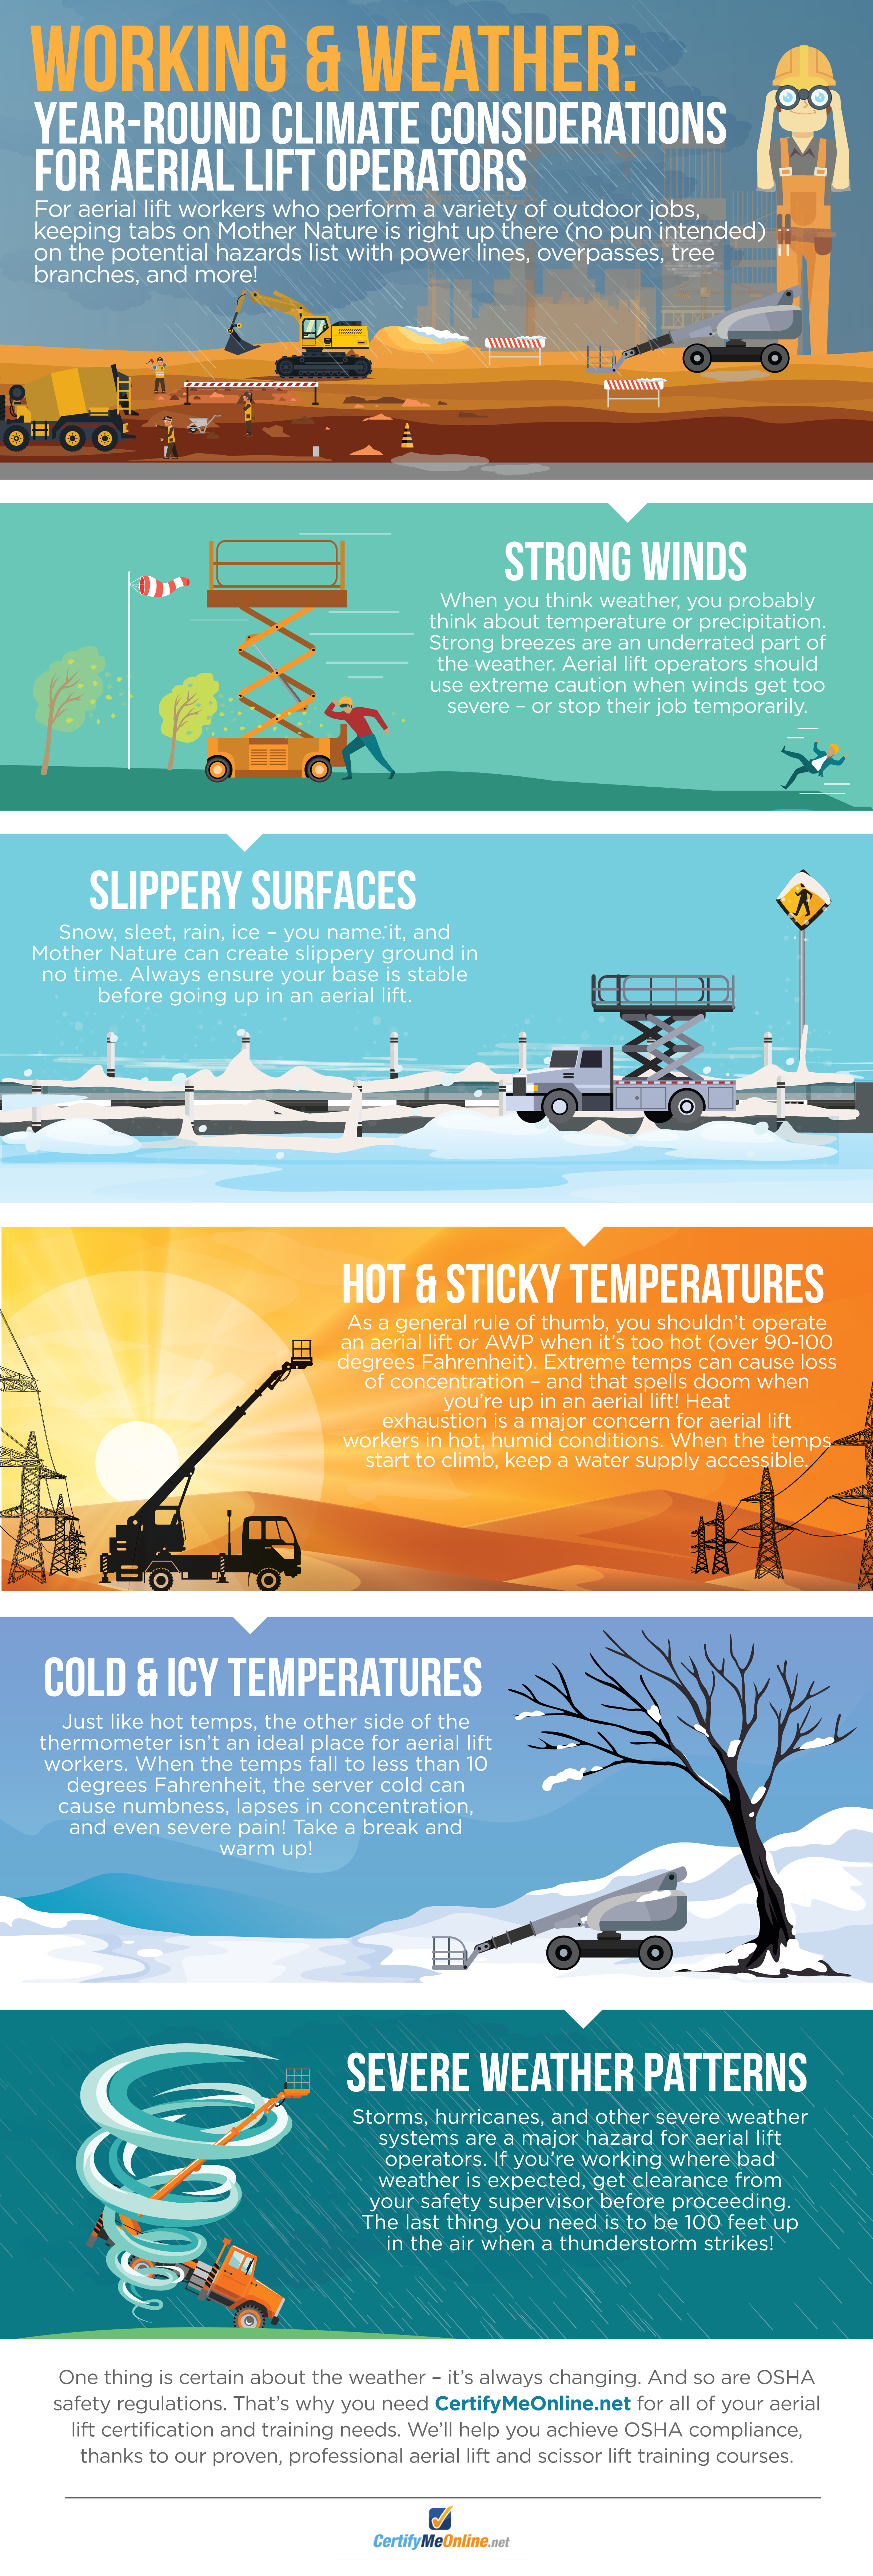 how weather affects aerial lift operators